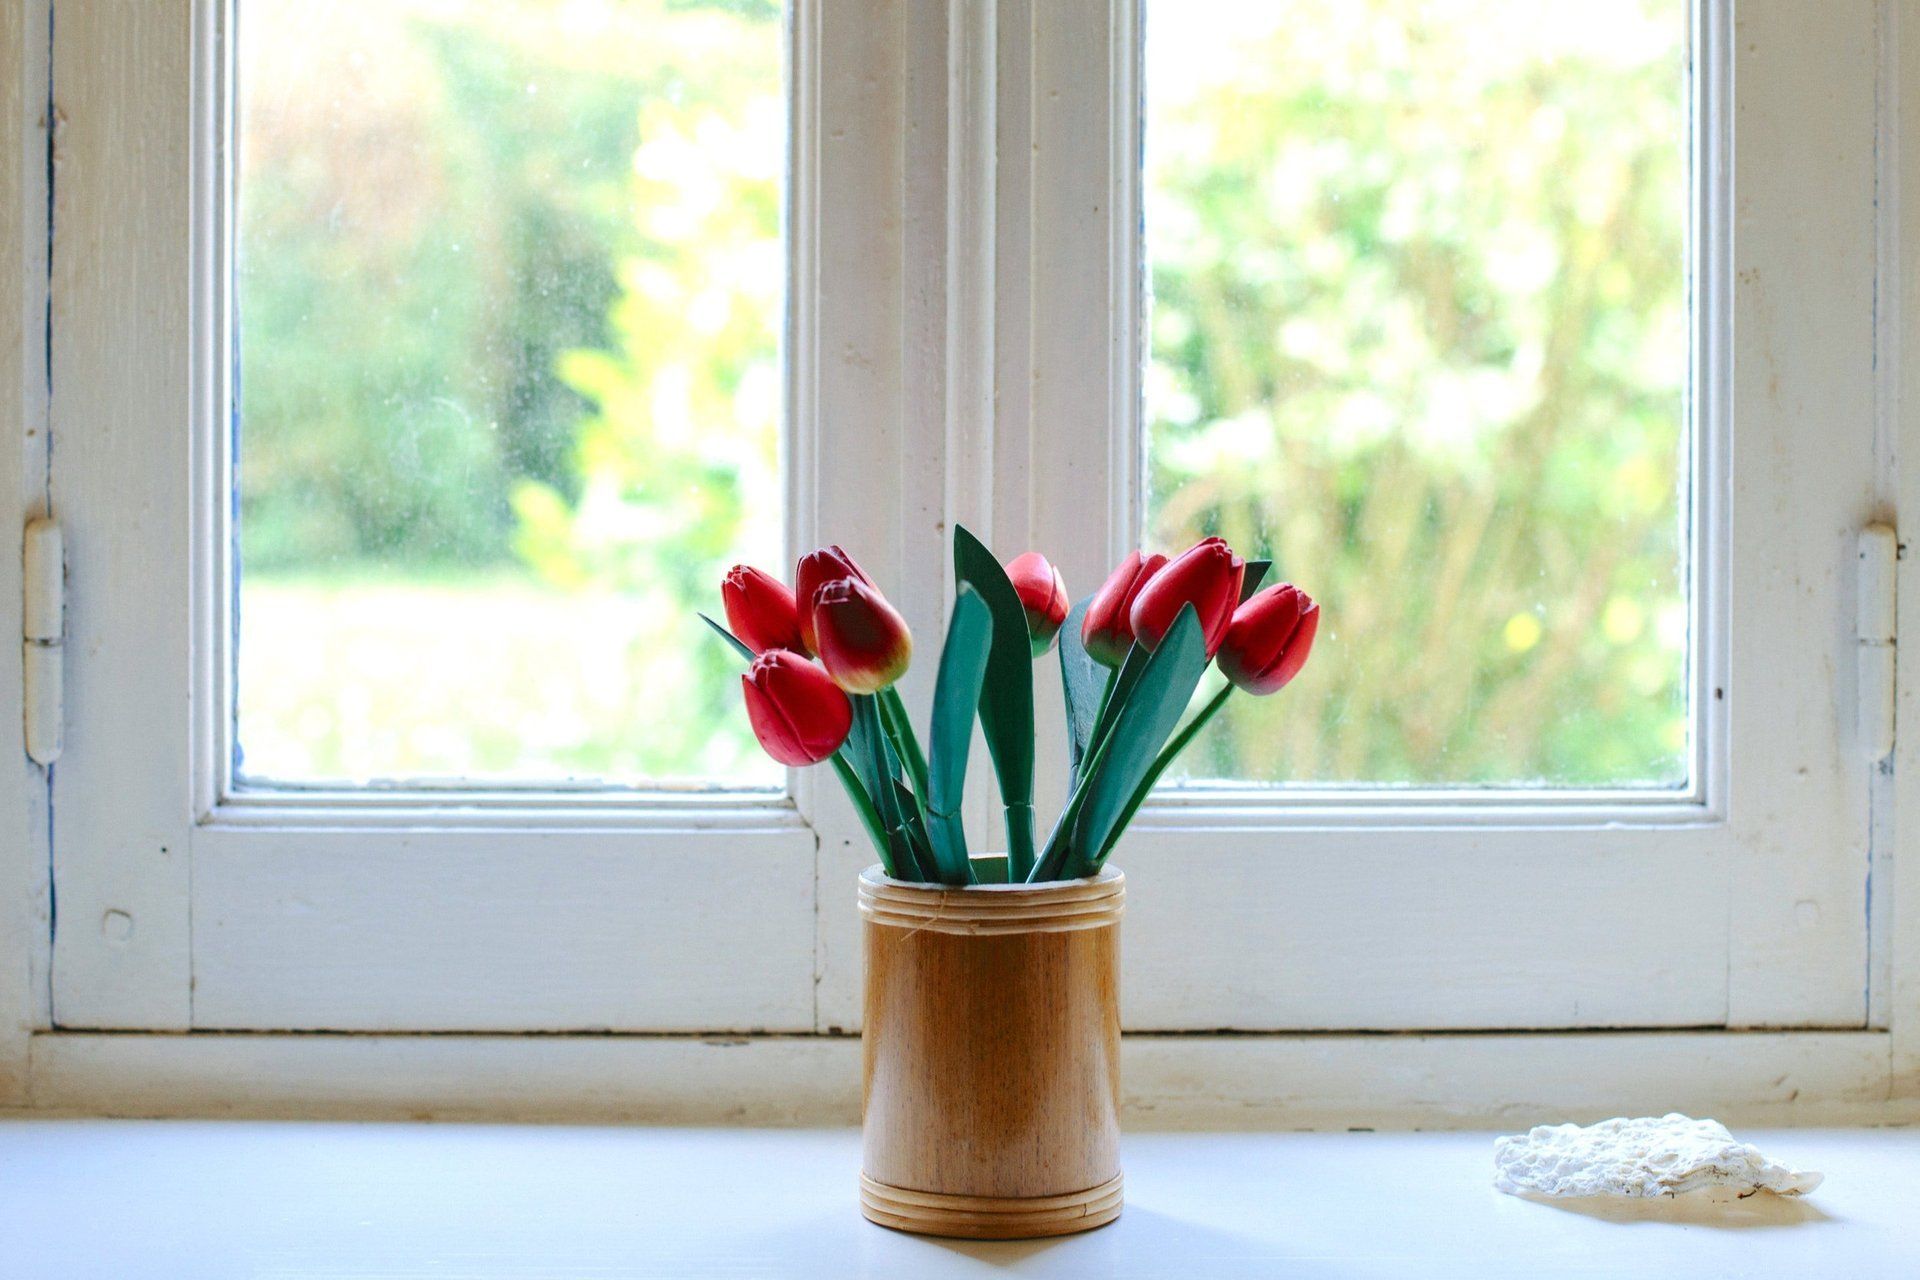 Red tulips in a vase in front of French windows in a Vermont home during spring